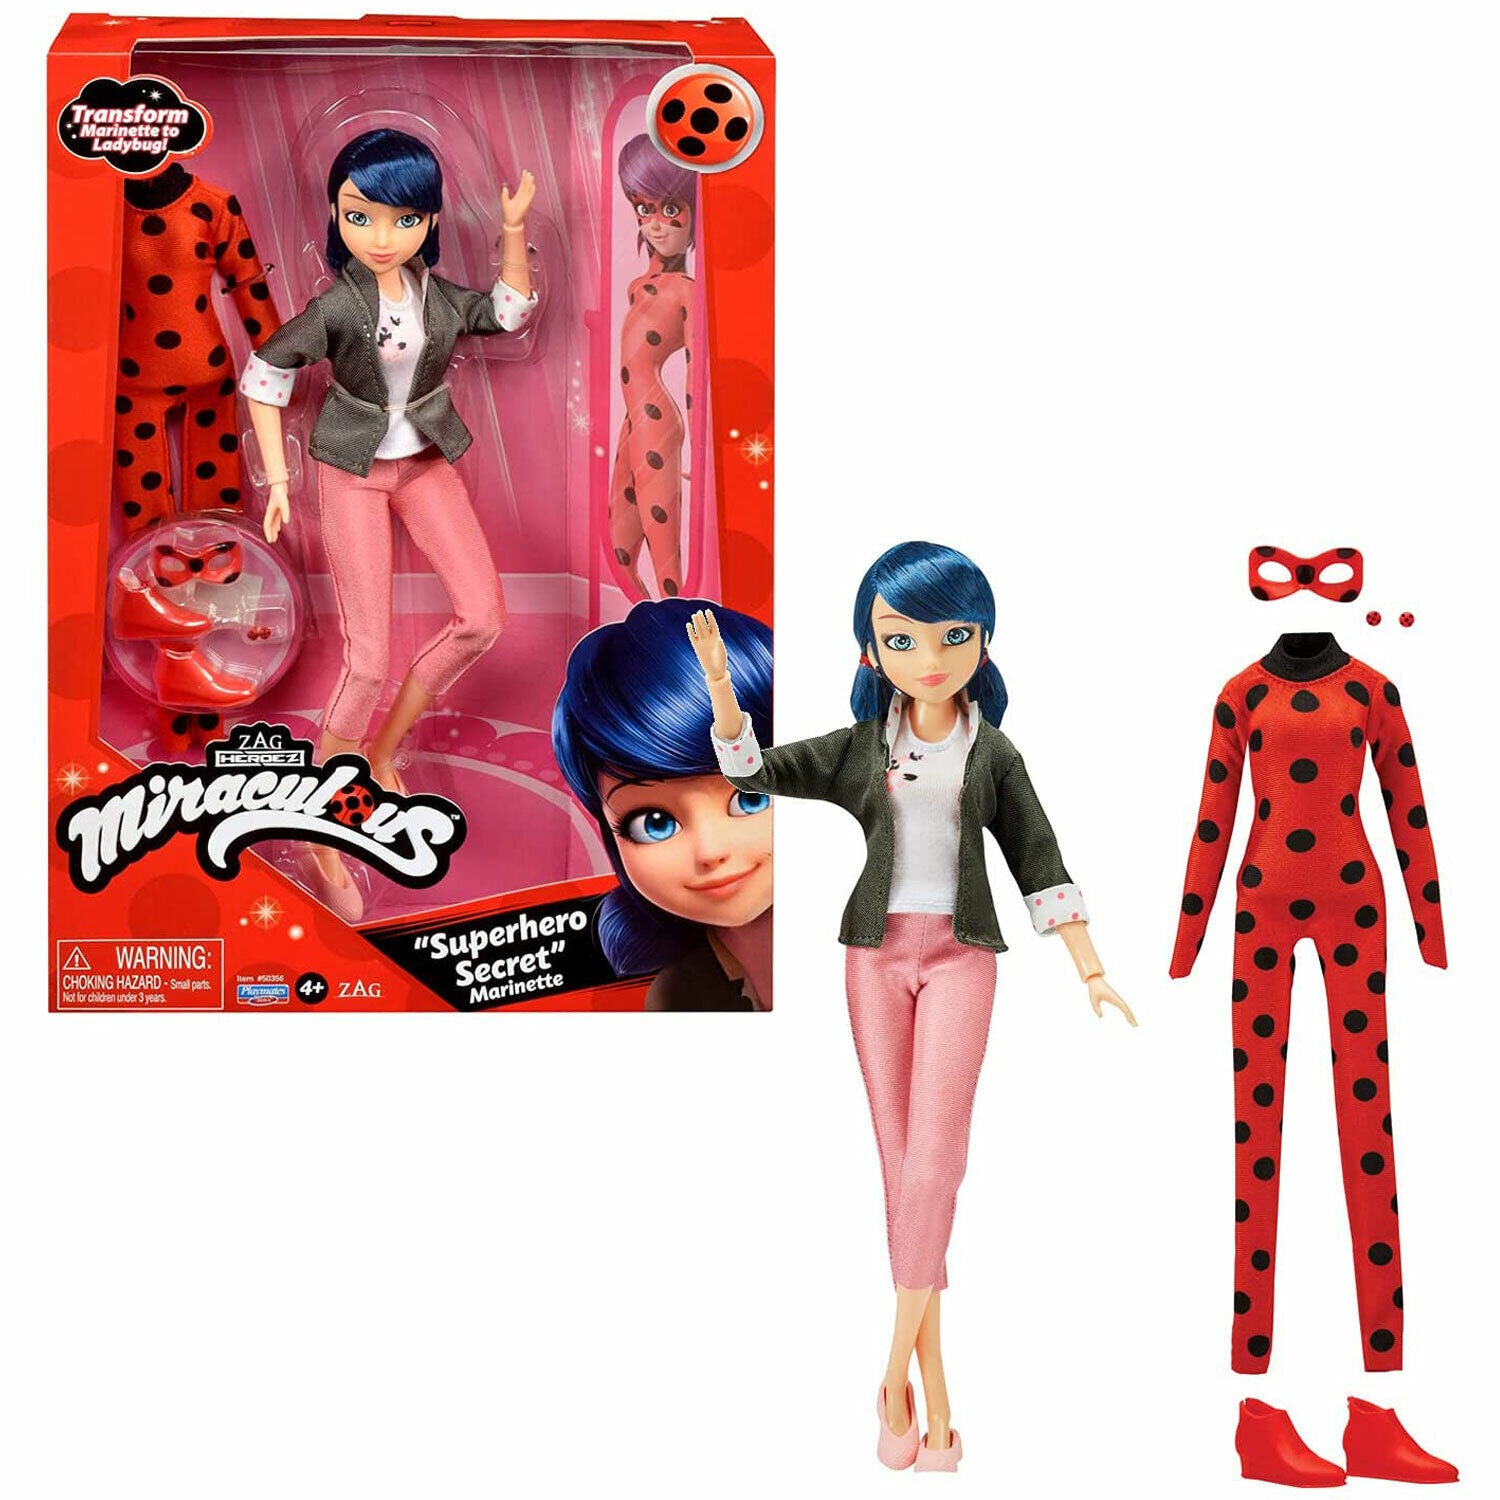 New Miraculous Ladybug Fashion Doll 26cm with 2 Outfits - Secret Marinette Super